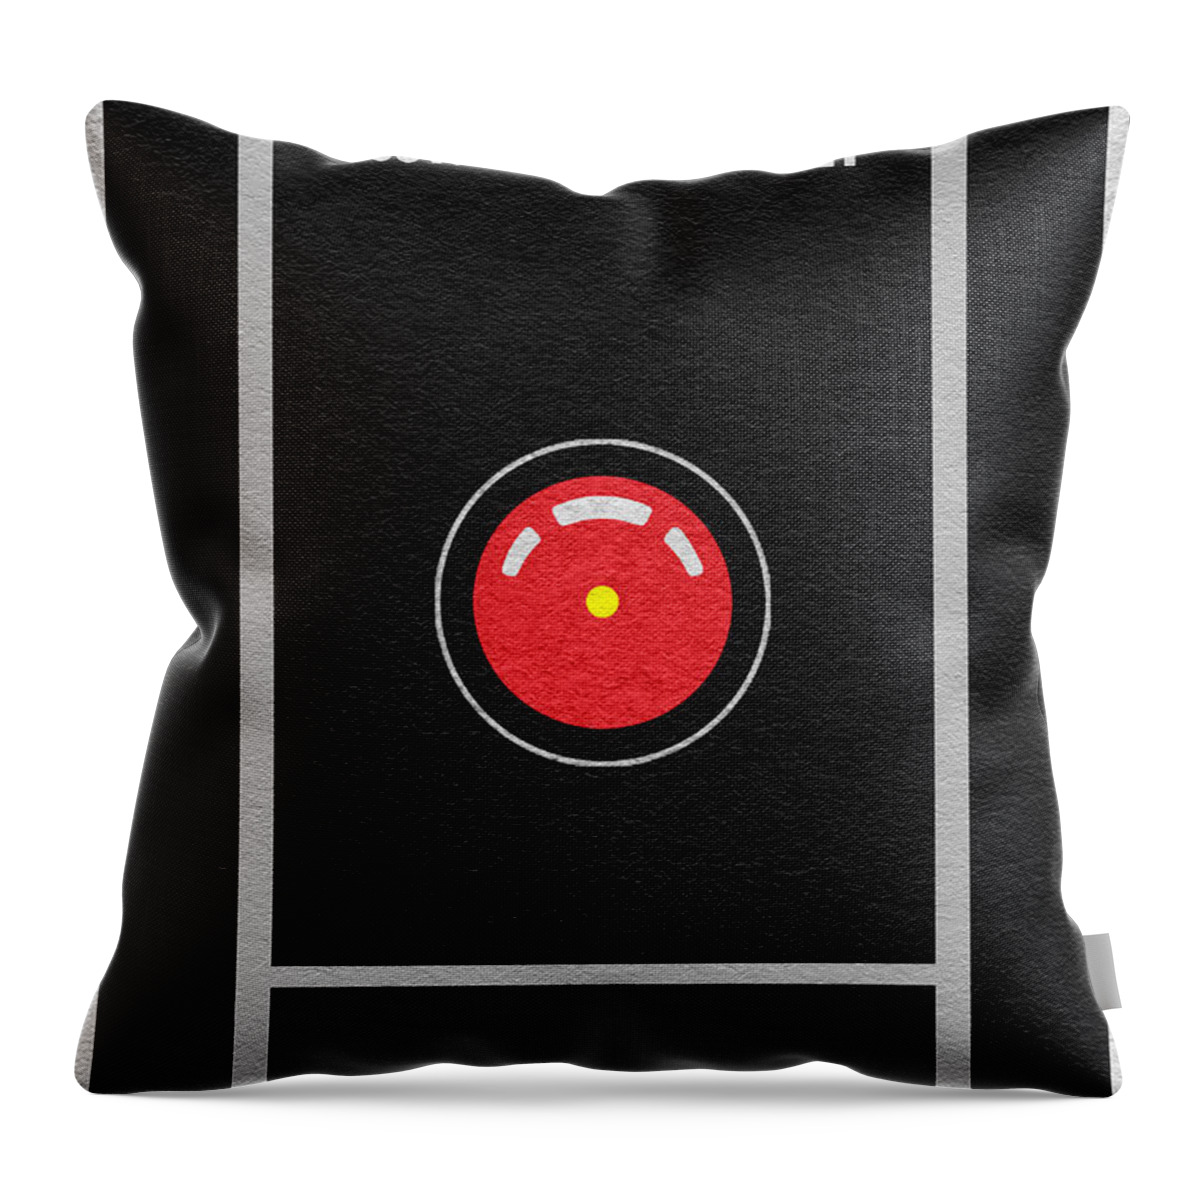 2001: A Space Odyssey Throw Pillow featuring the digital art 2001 A Space Odyssey by Inspirowl Design